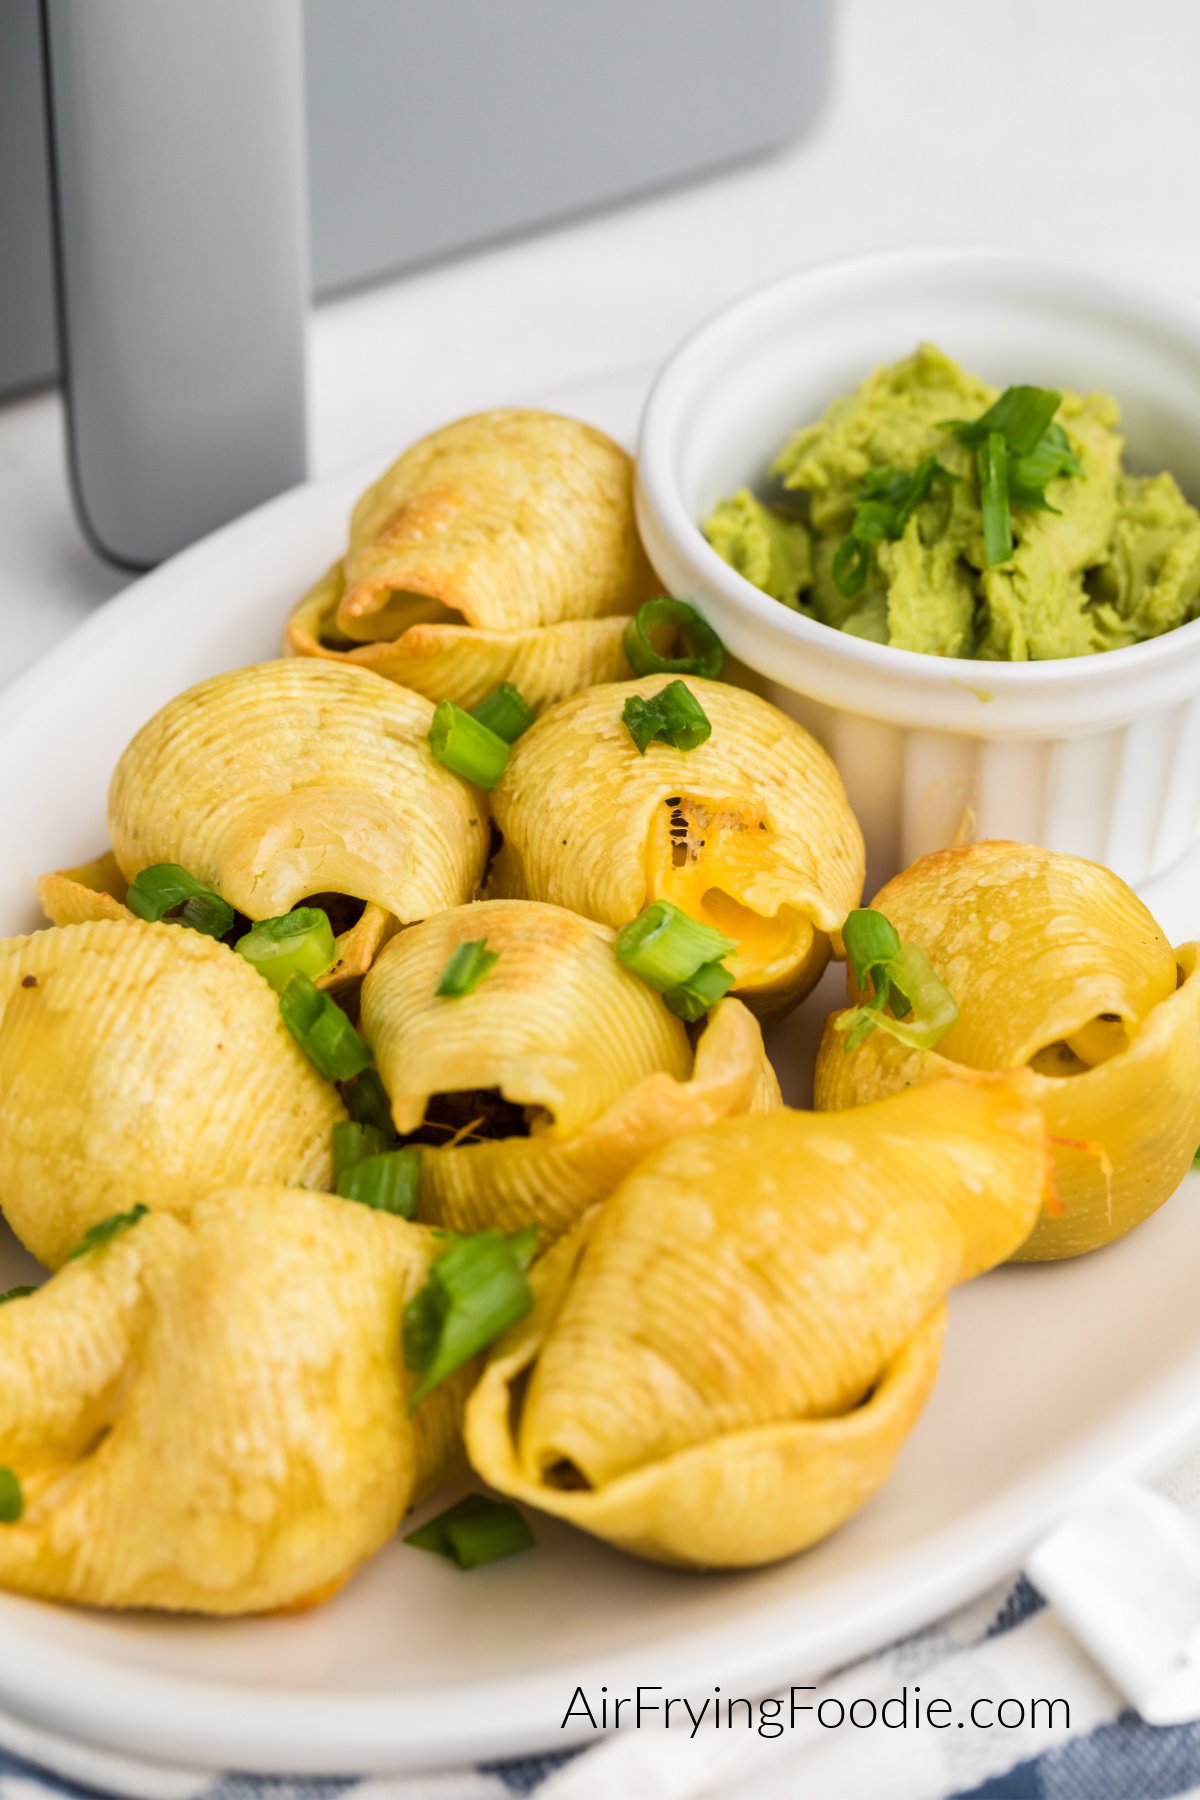 Taco stuffed shells made in the air fryer, served on a white plate with a side of guacamole.